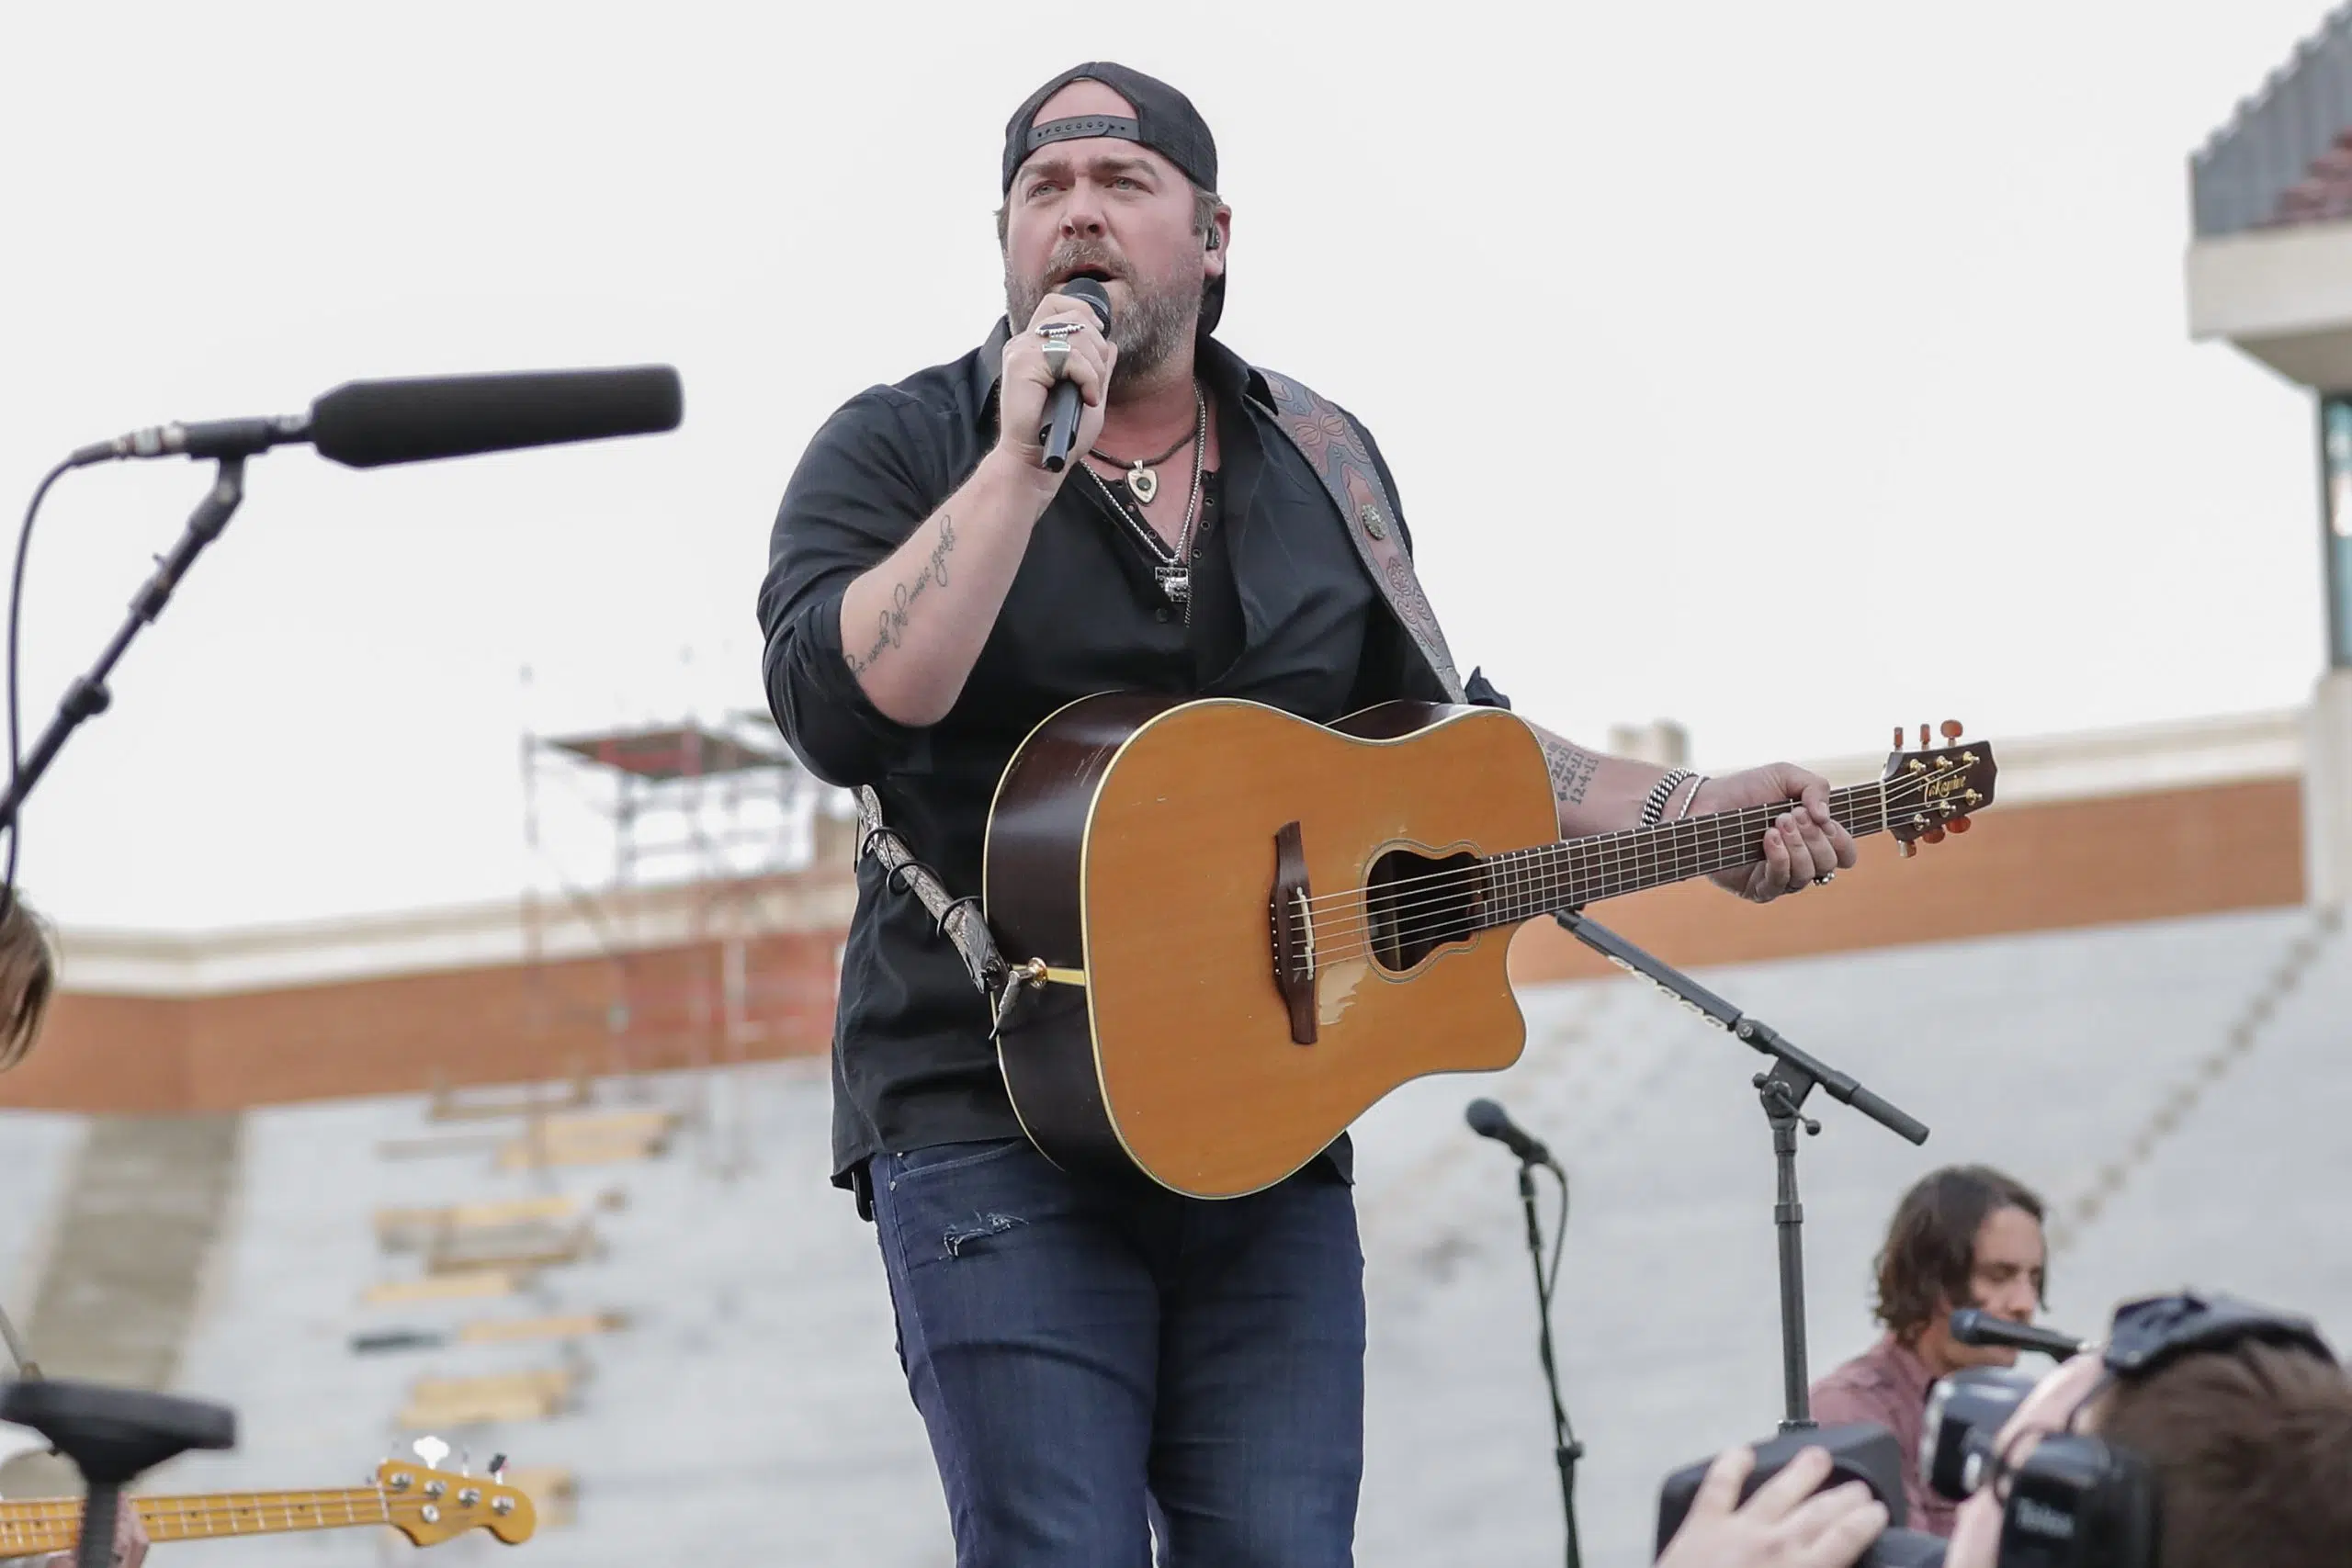 Lee Brice to Debut New Song During Farm Progress Show Concert